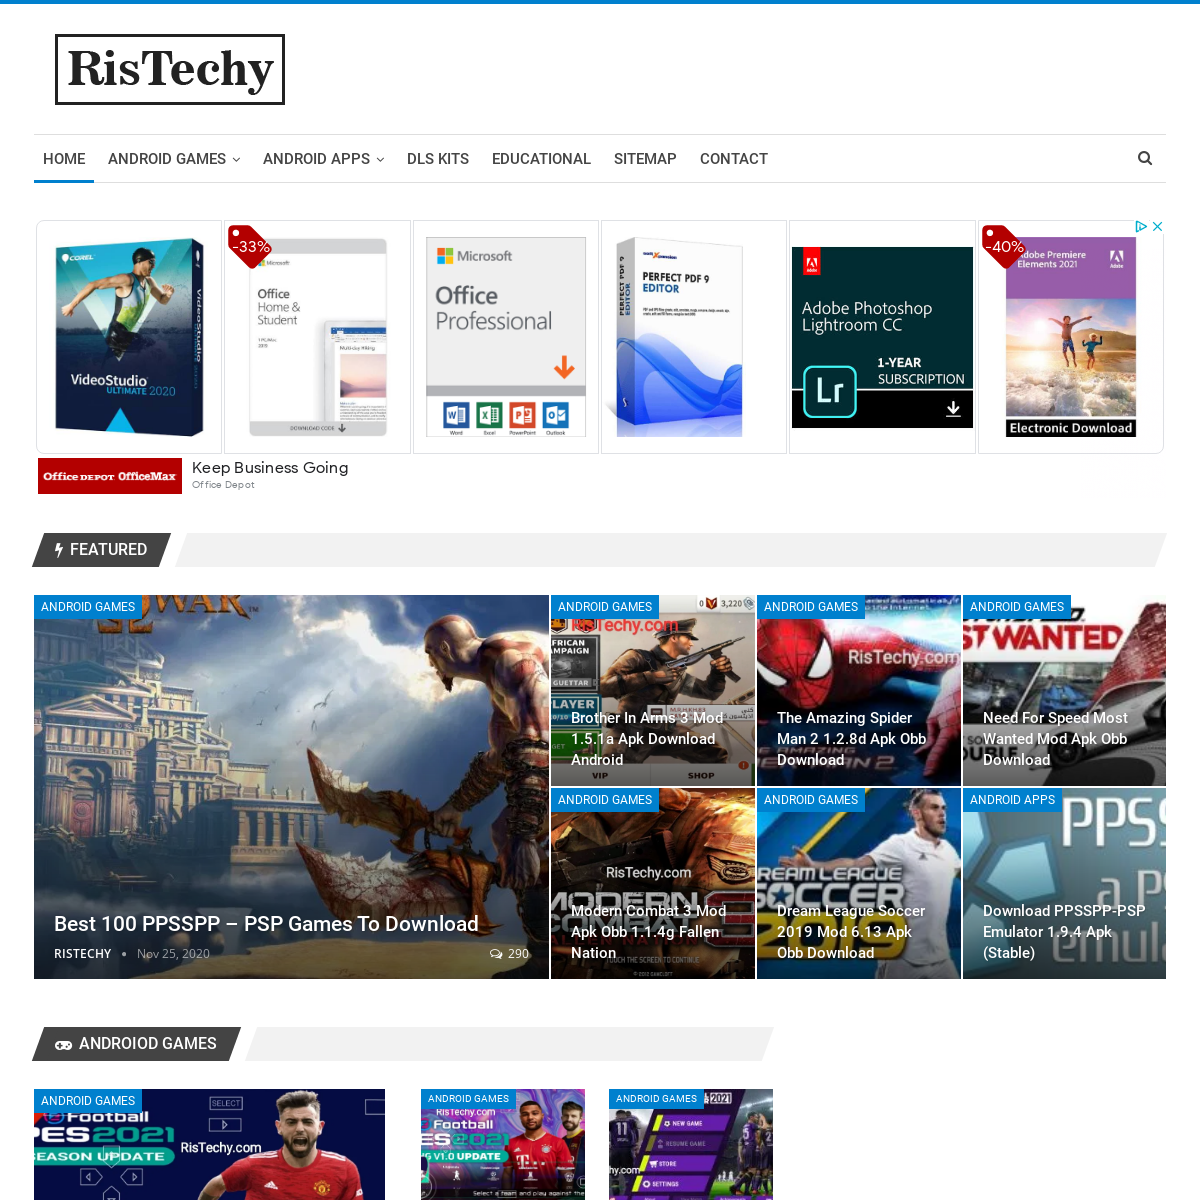 A complete backup of ristechy.com